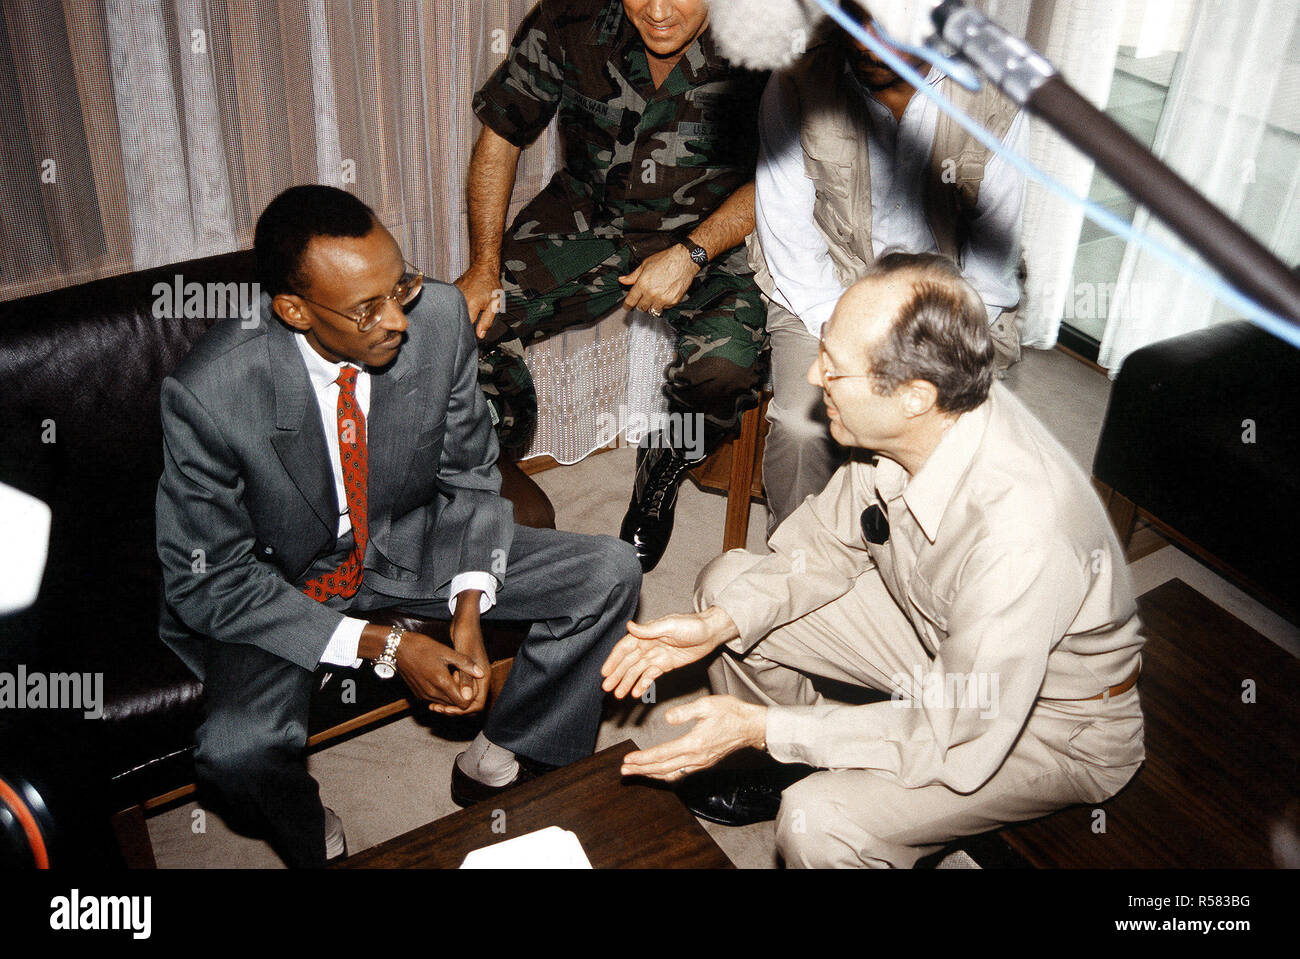 1994 - U.S. Secretary of Defense William Perry discusses the Rwandan civil war and refugee situation with Rwandan President Paul Kagami during the secretary's visit to Kigali. Stock Photo